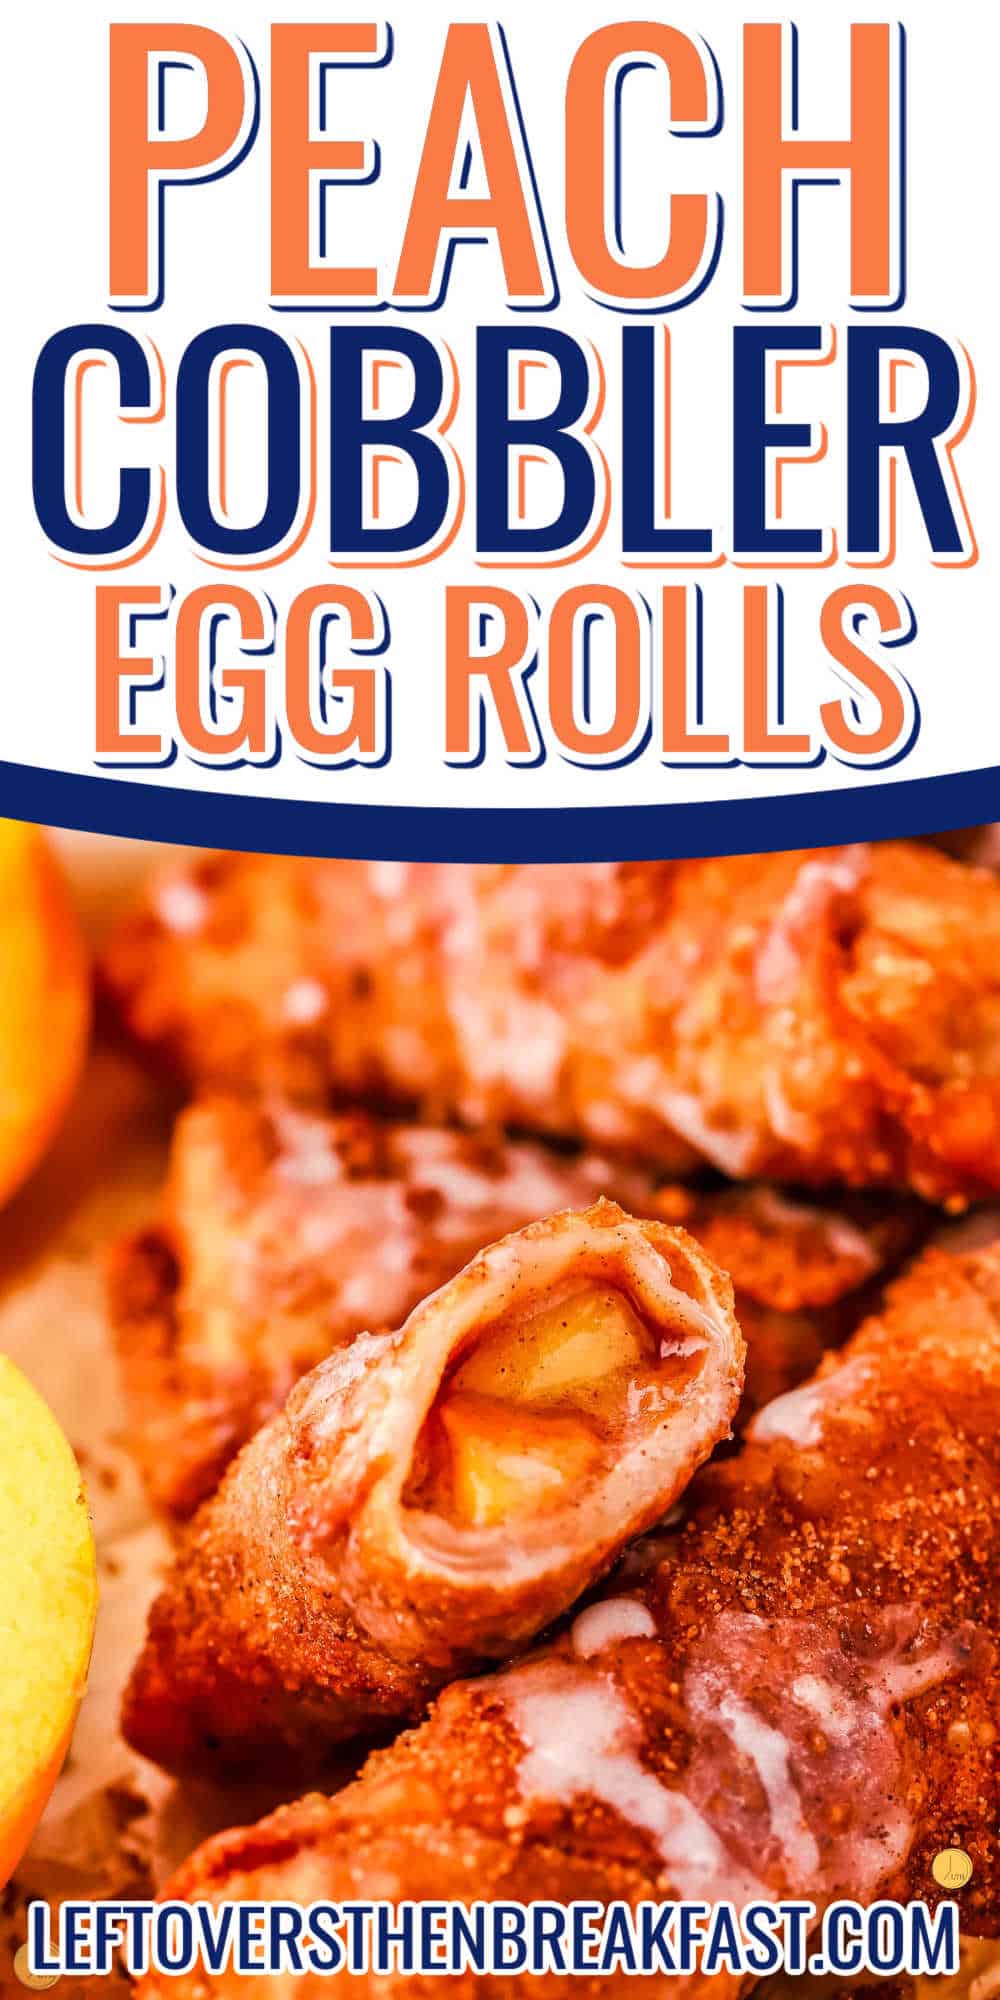 stack of egg rolls with text "Peach Cobbler Egg Rolls"